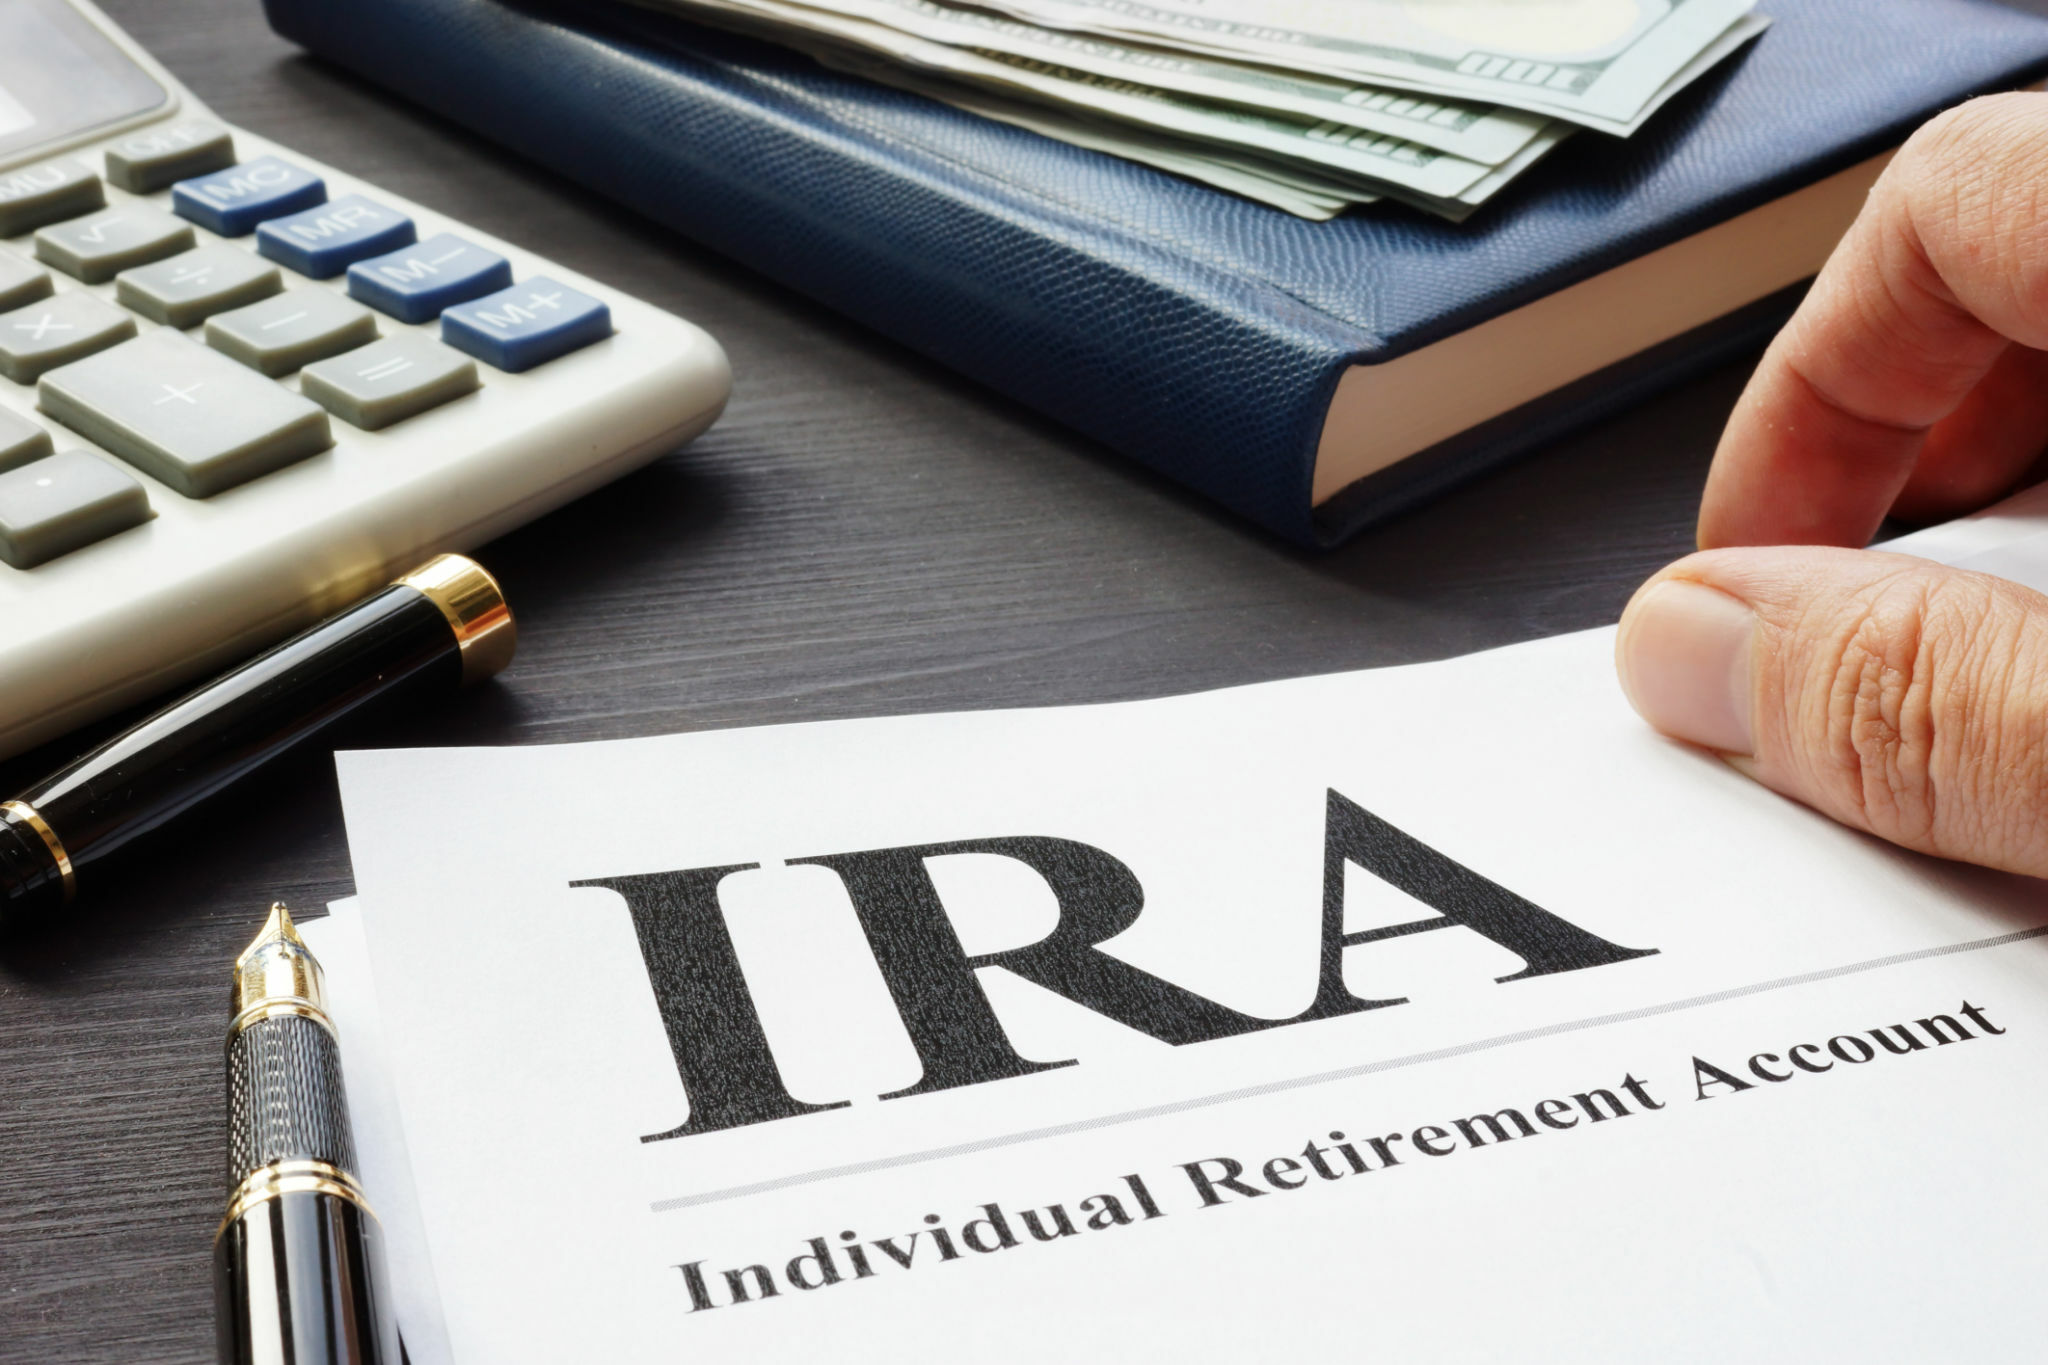 Opening a Roth IRA